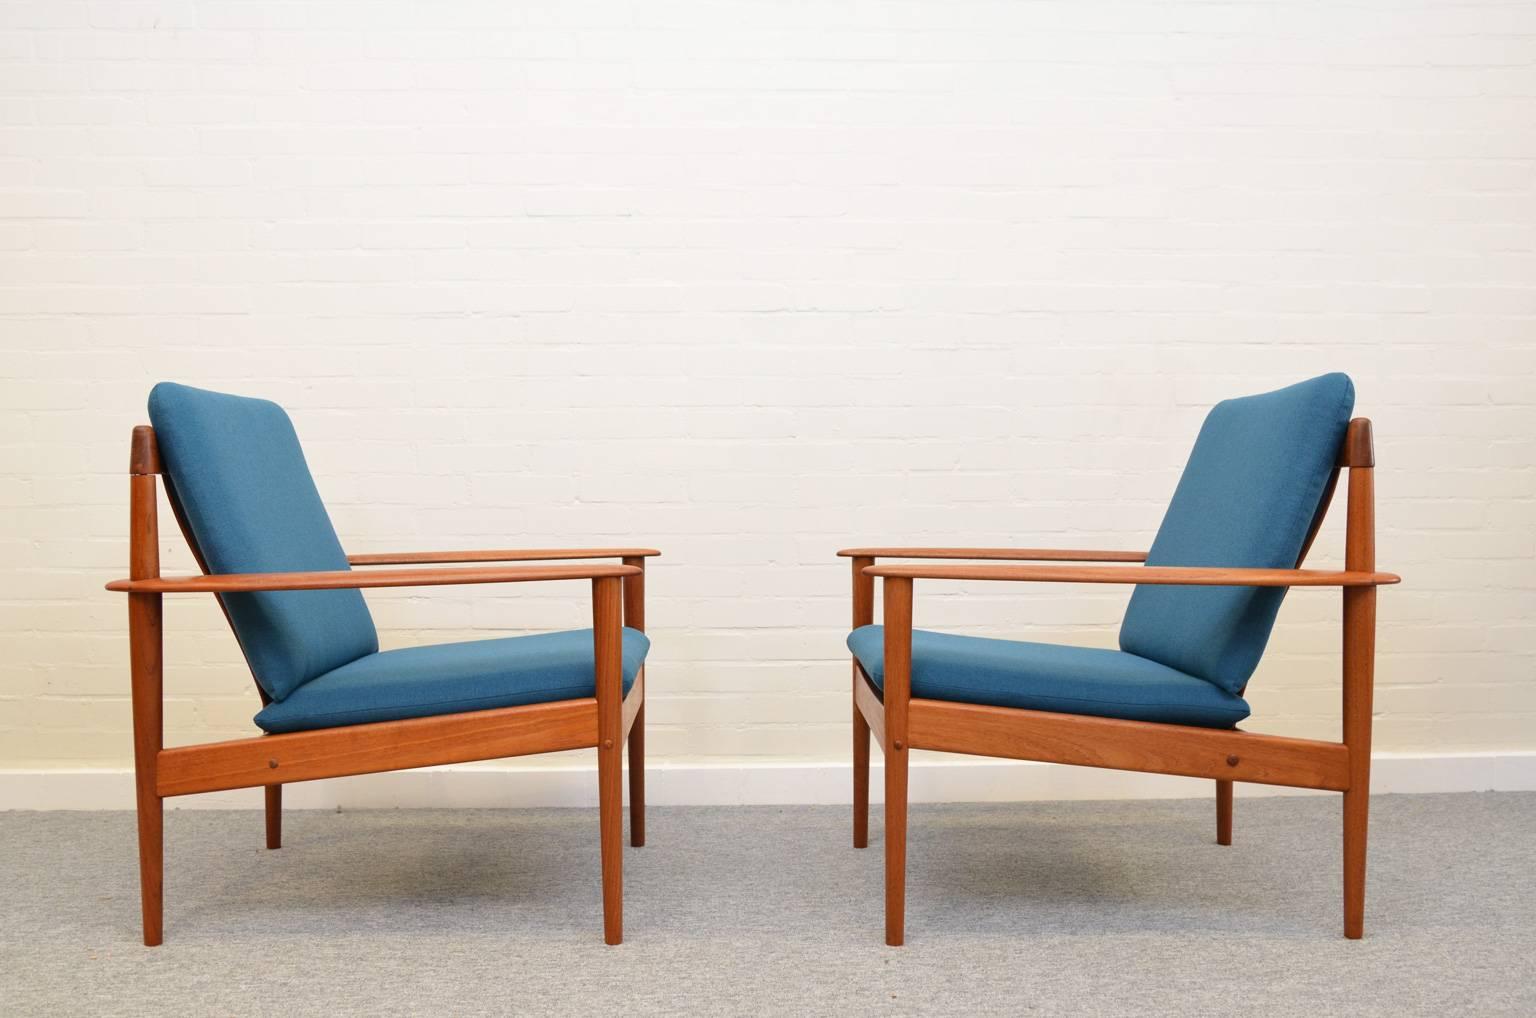 Two easy chairs model PJ56 in teak with new blue upholstery. Simple and elegant, typical for designs by Grete Jalk. Marked under the seating. 